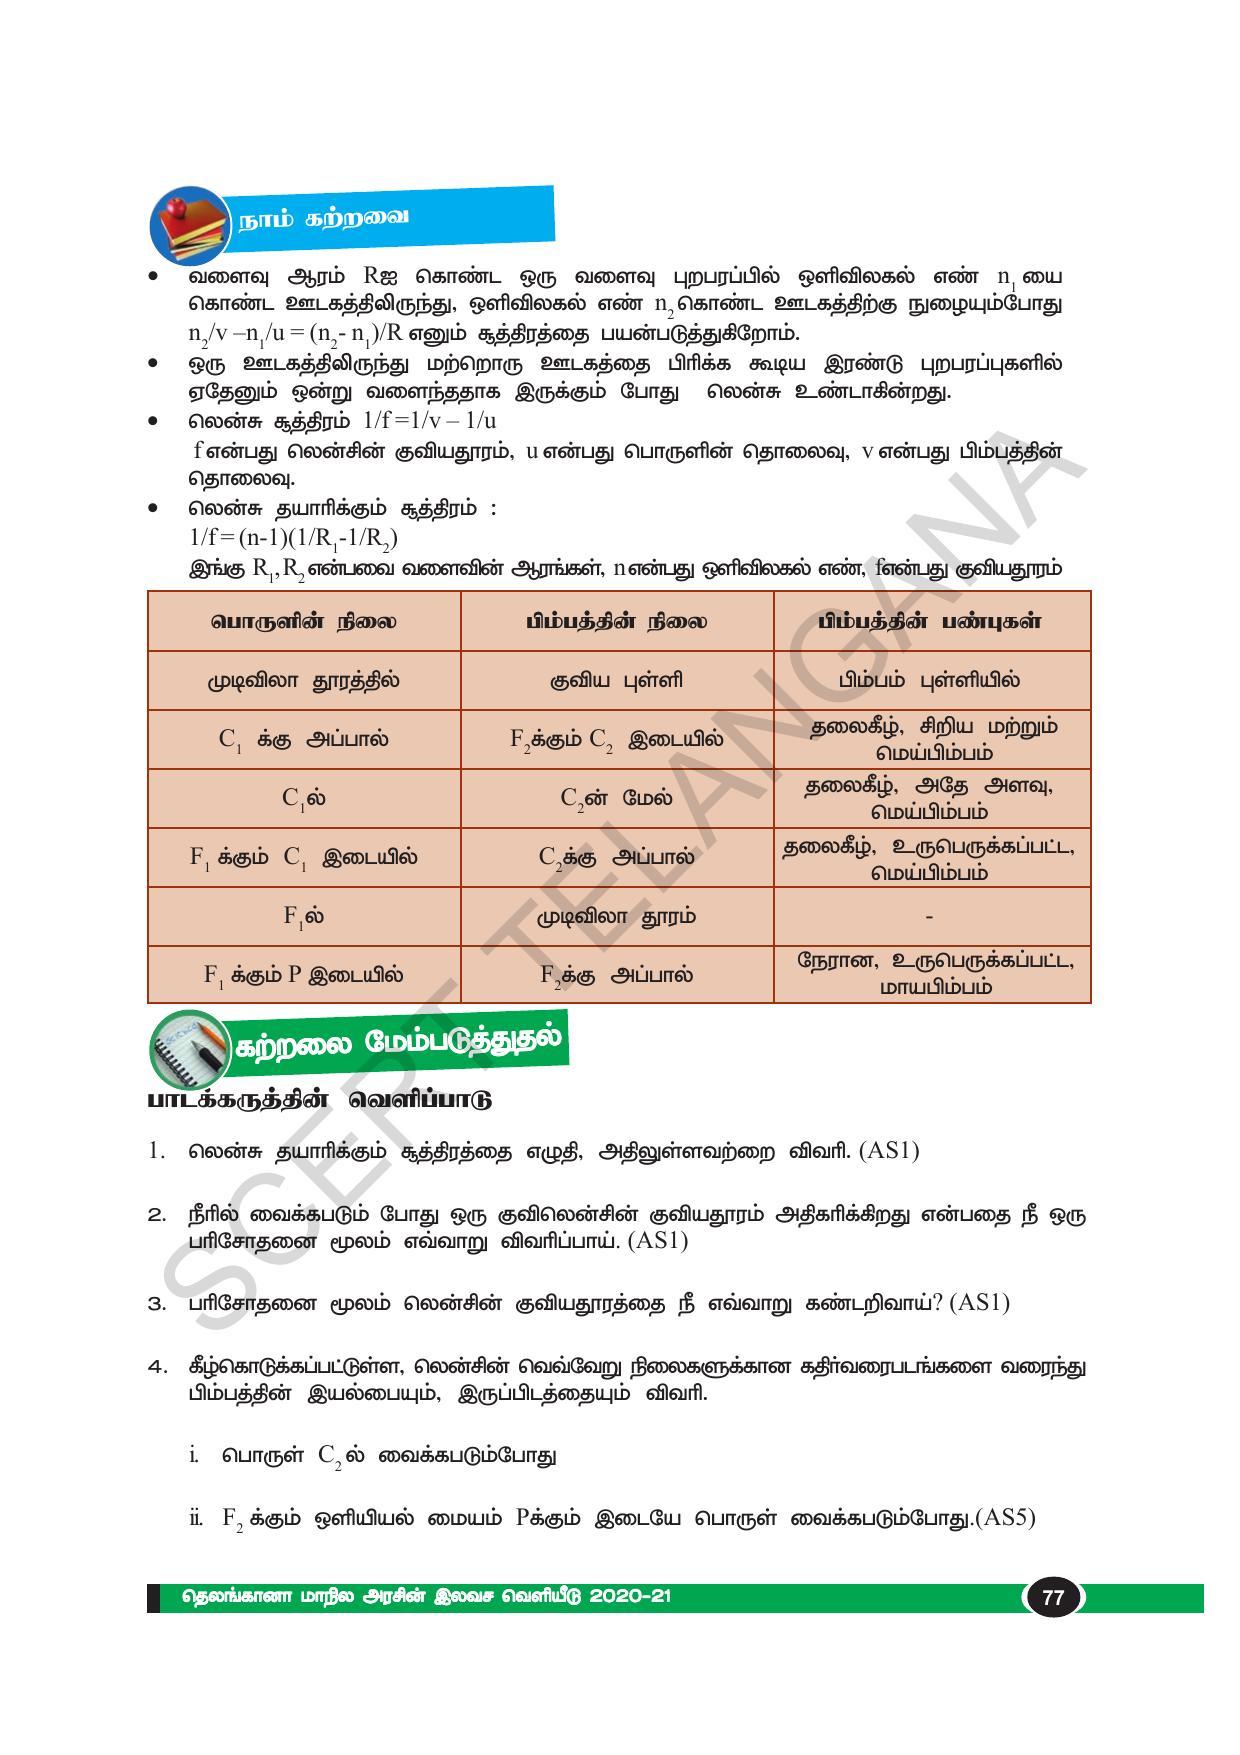 TS SCERT Class 10 Physical Science(Tamil Medium) Text Book - Page 89